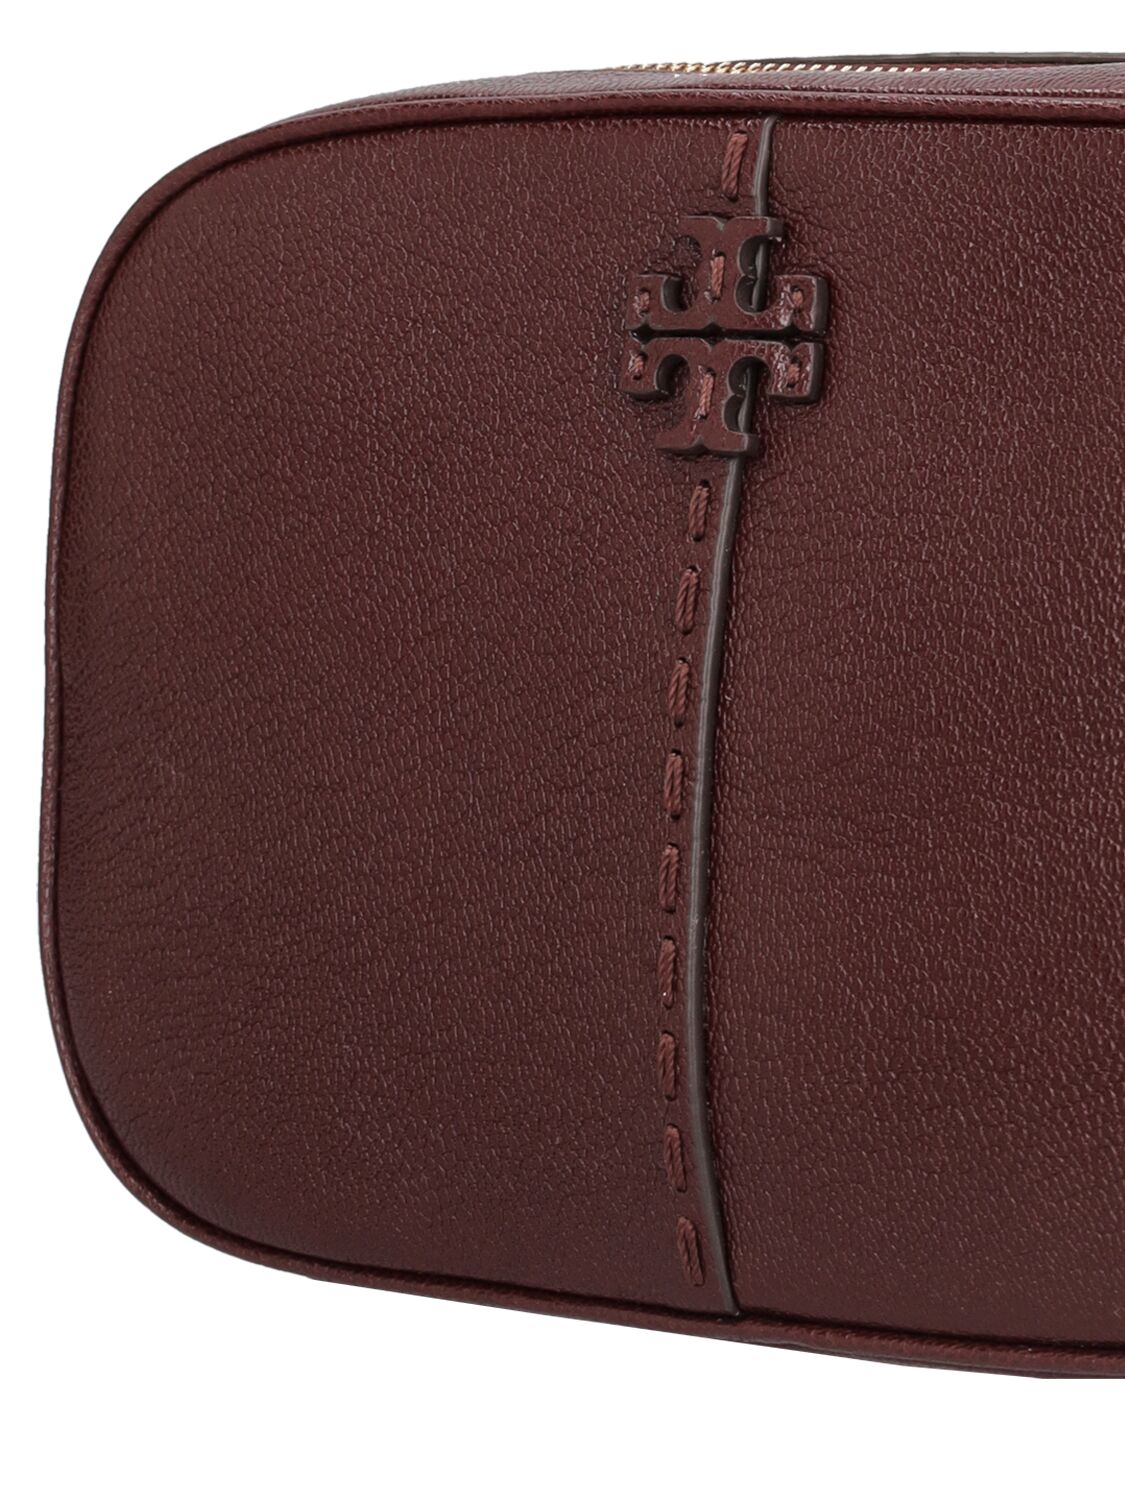 Shop Tory Burch Mcgraw Leather Camera Bag In Bordeaux